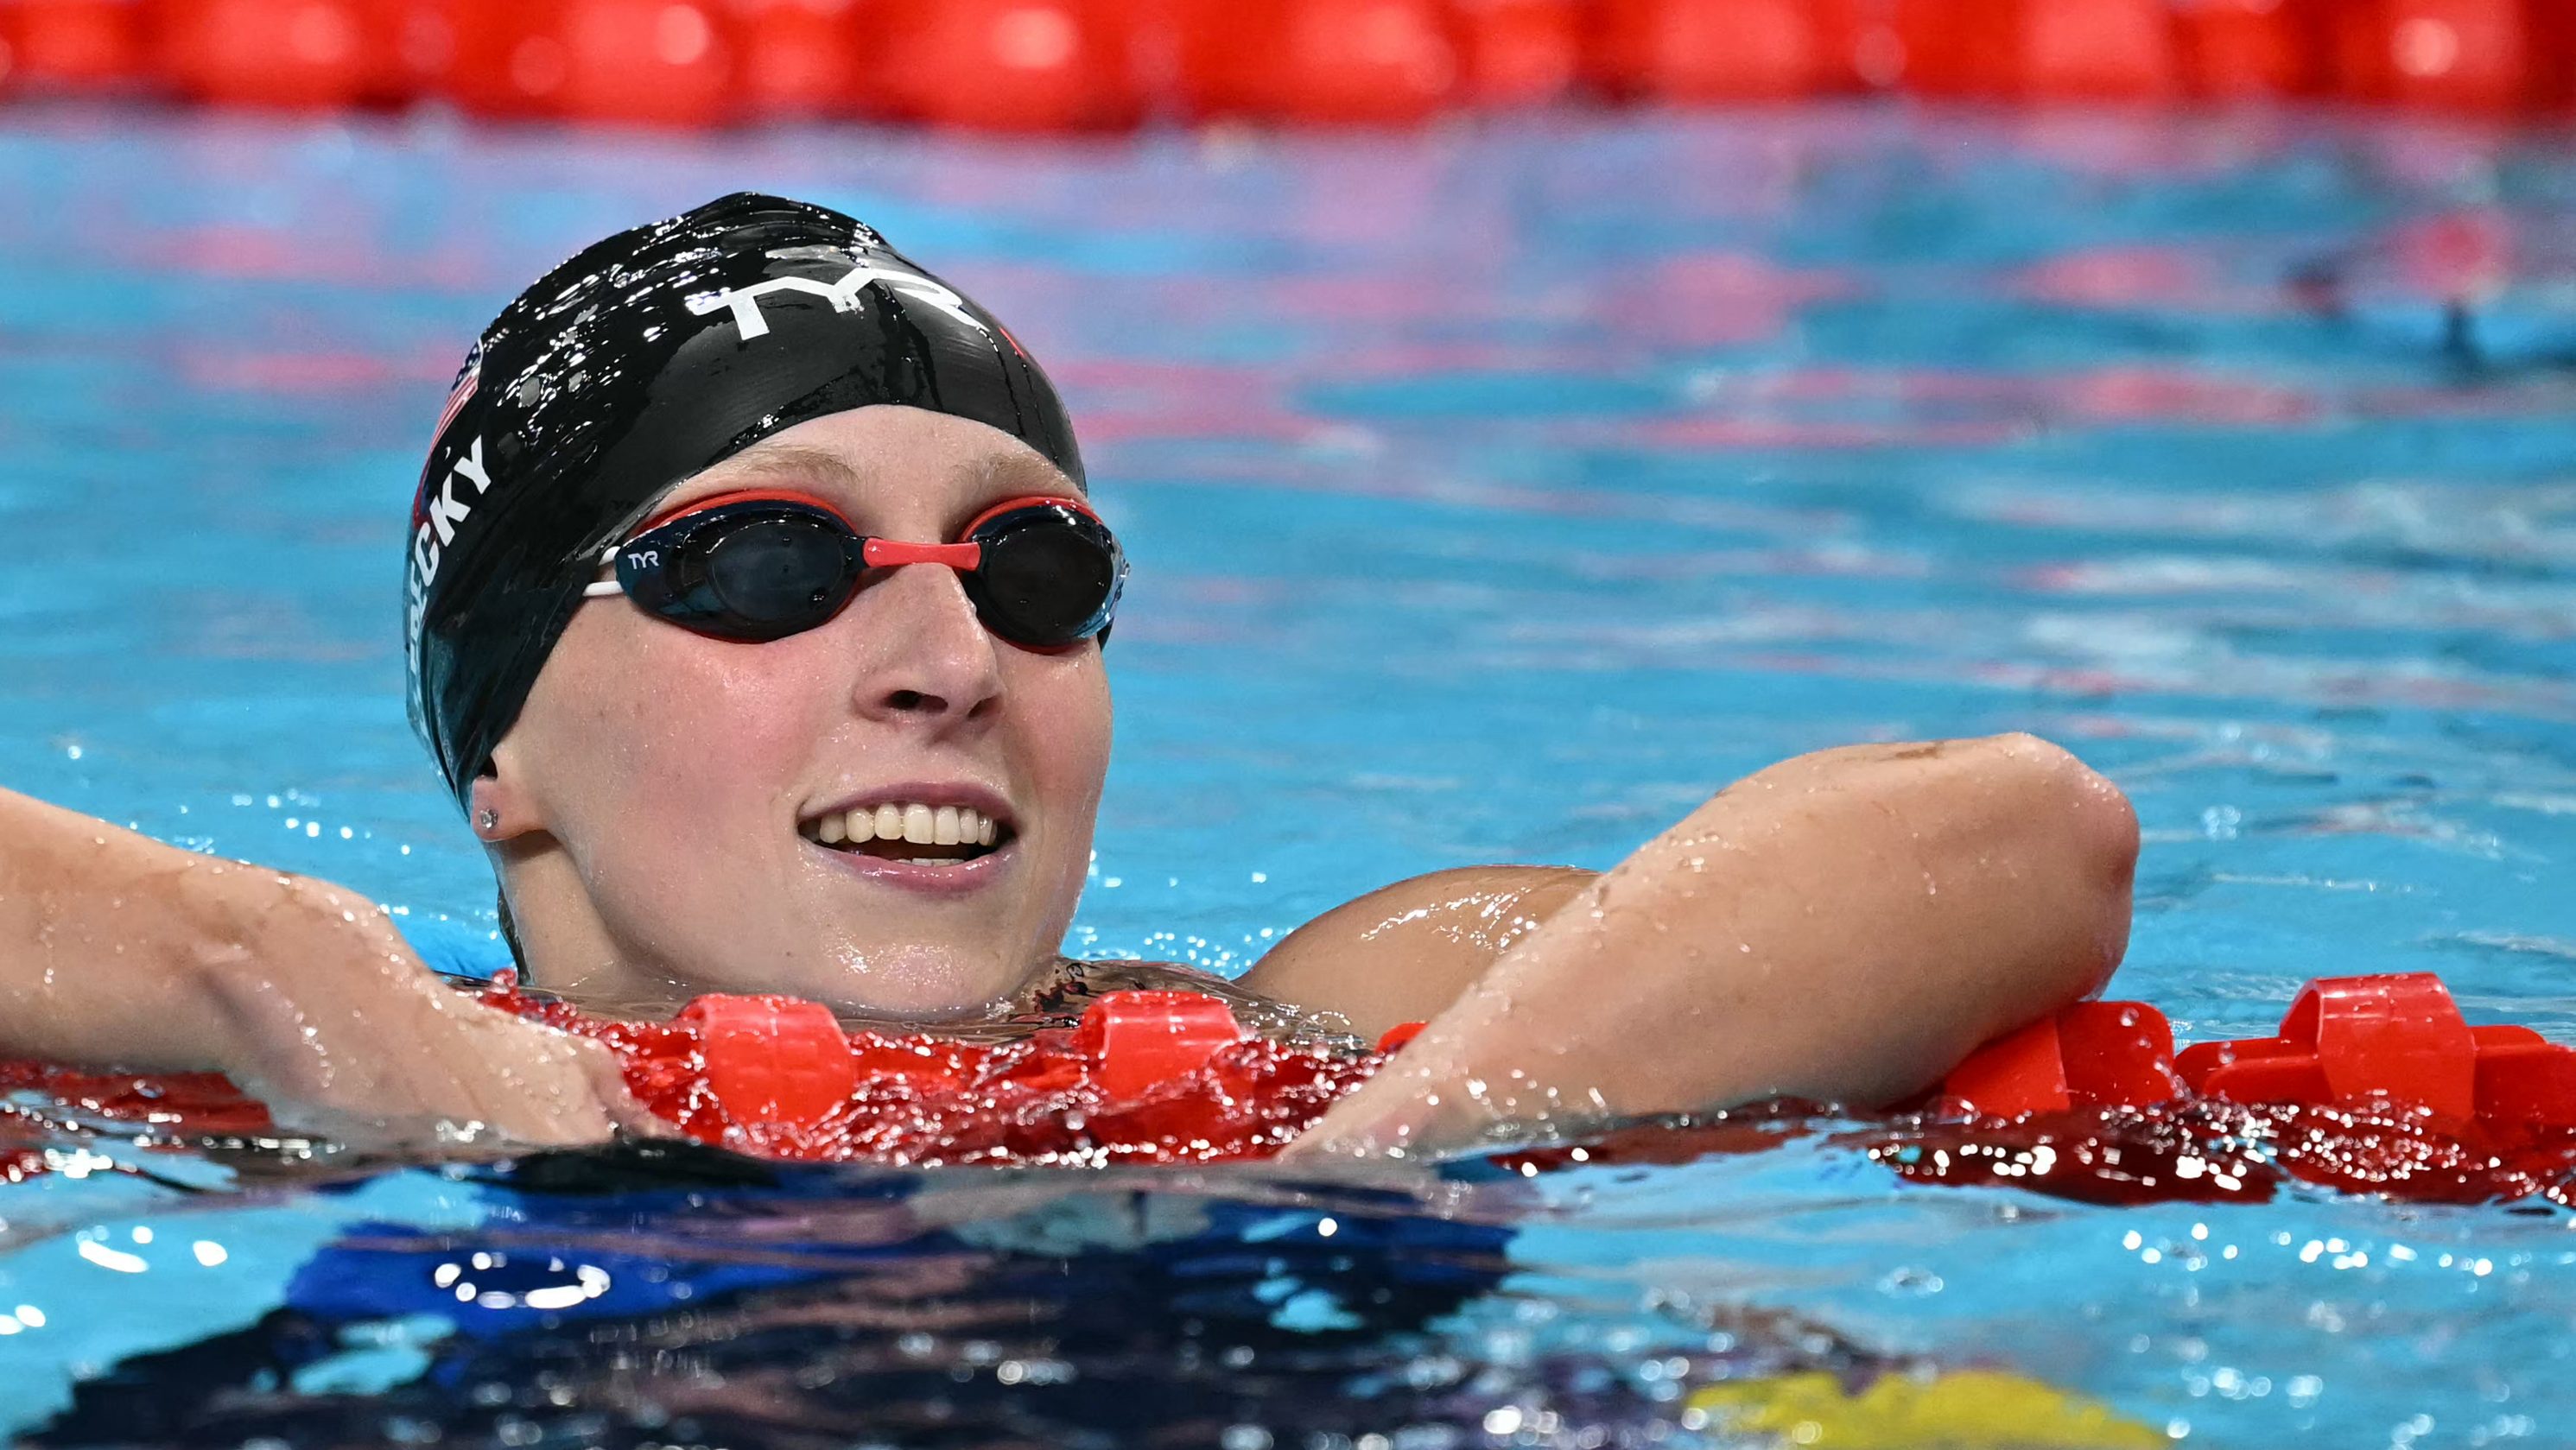 WATCH: Katie Ledecky wins historic 9th gold with four-peat in 800m freestyle